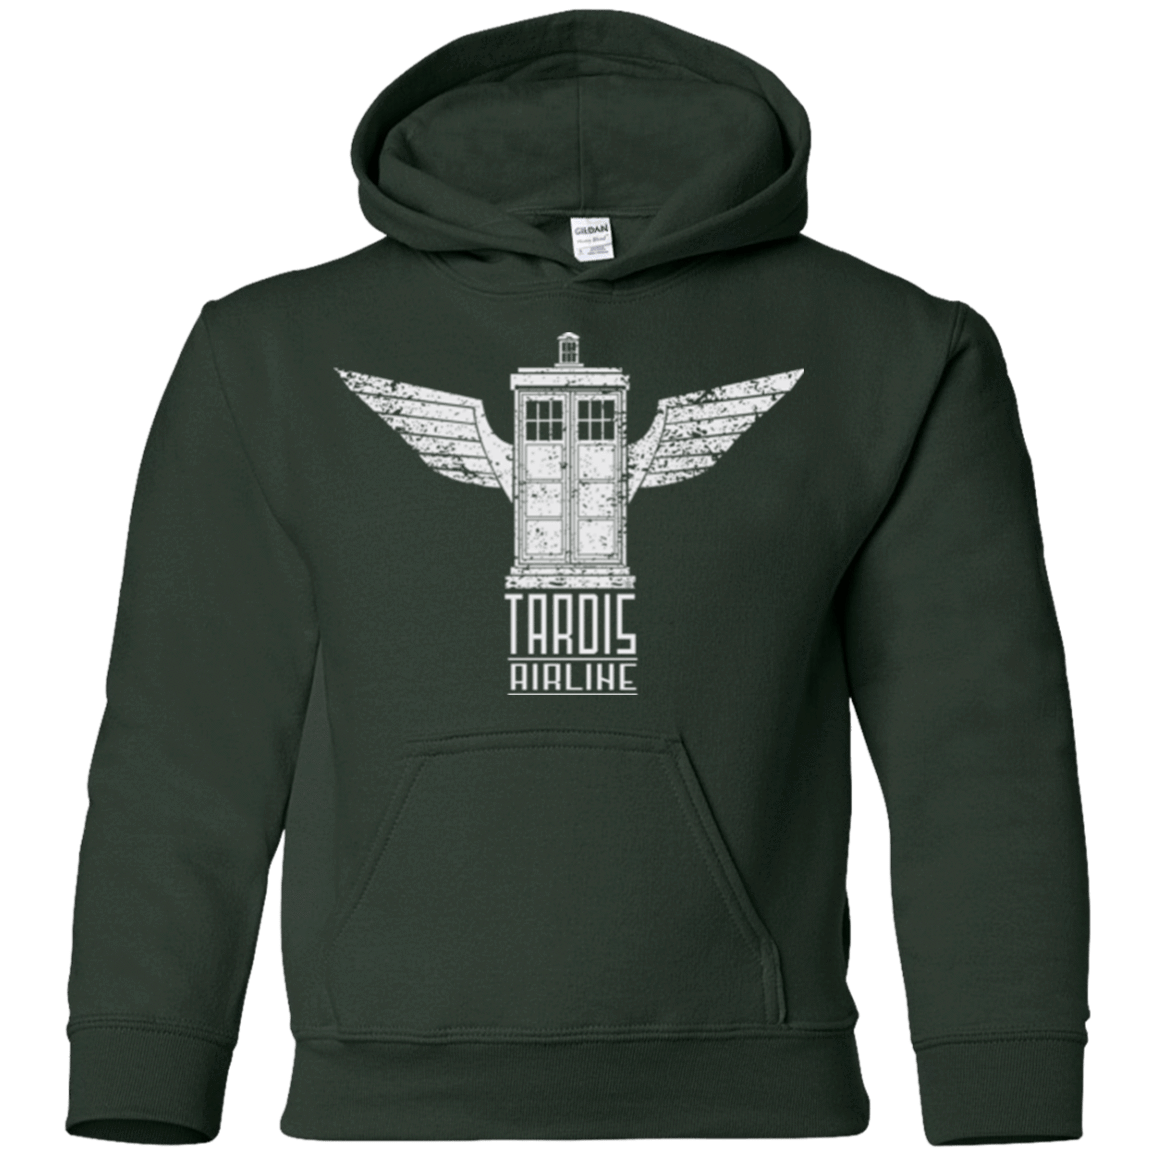 Sweatshirts Forest Green / YS Tardis Airline Youth Hoodie